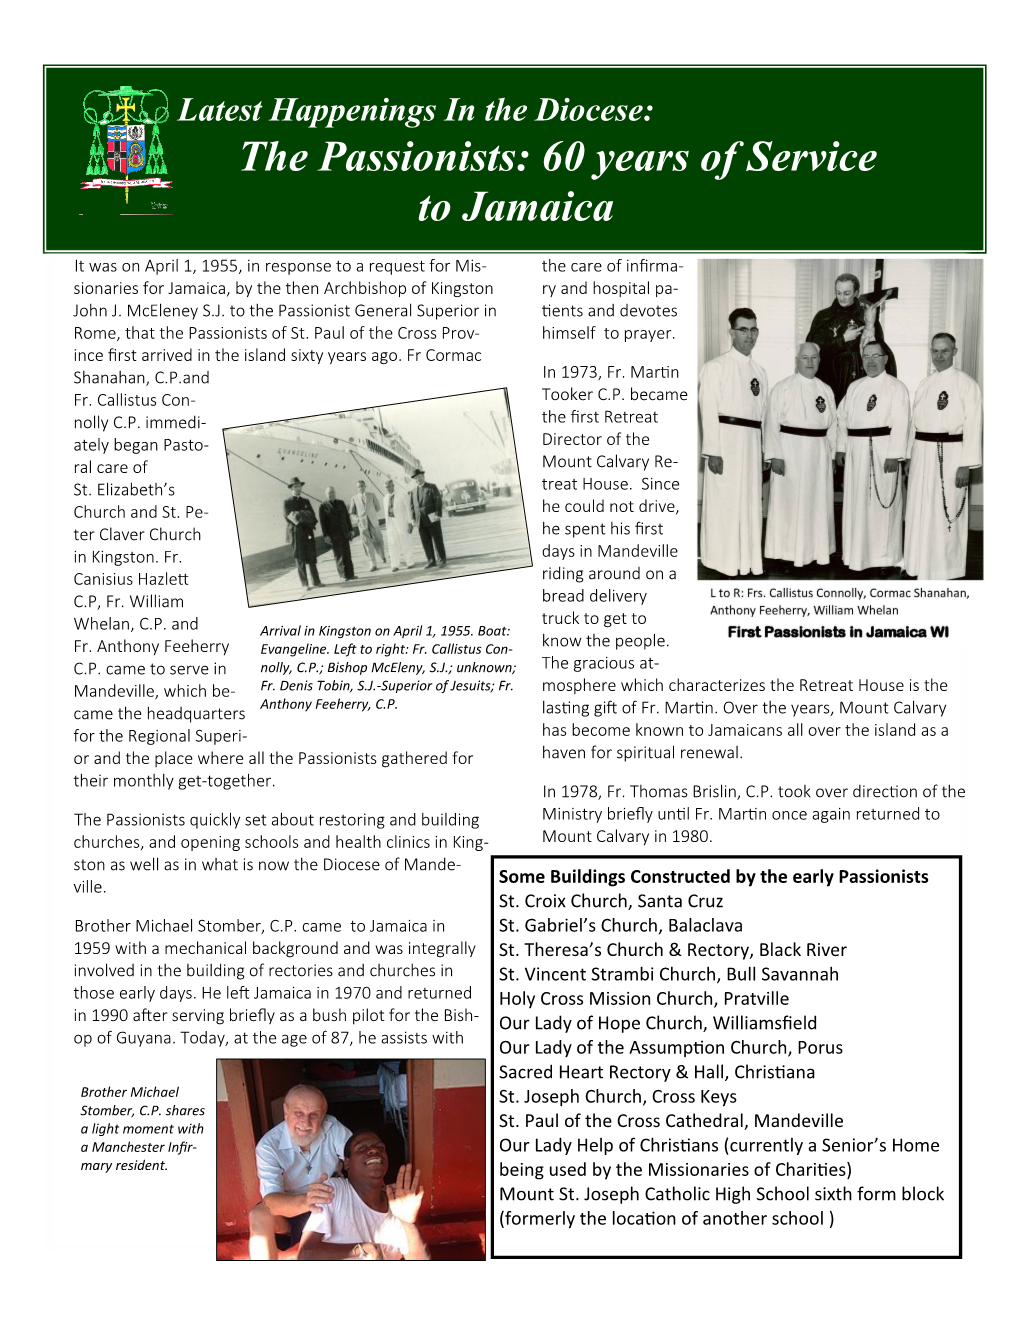 The Passionists: 60 Years of Service to Jamaica